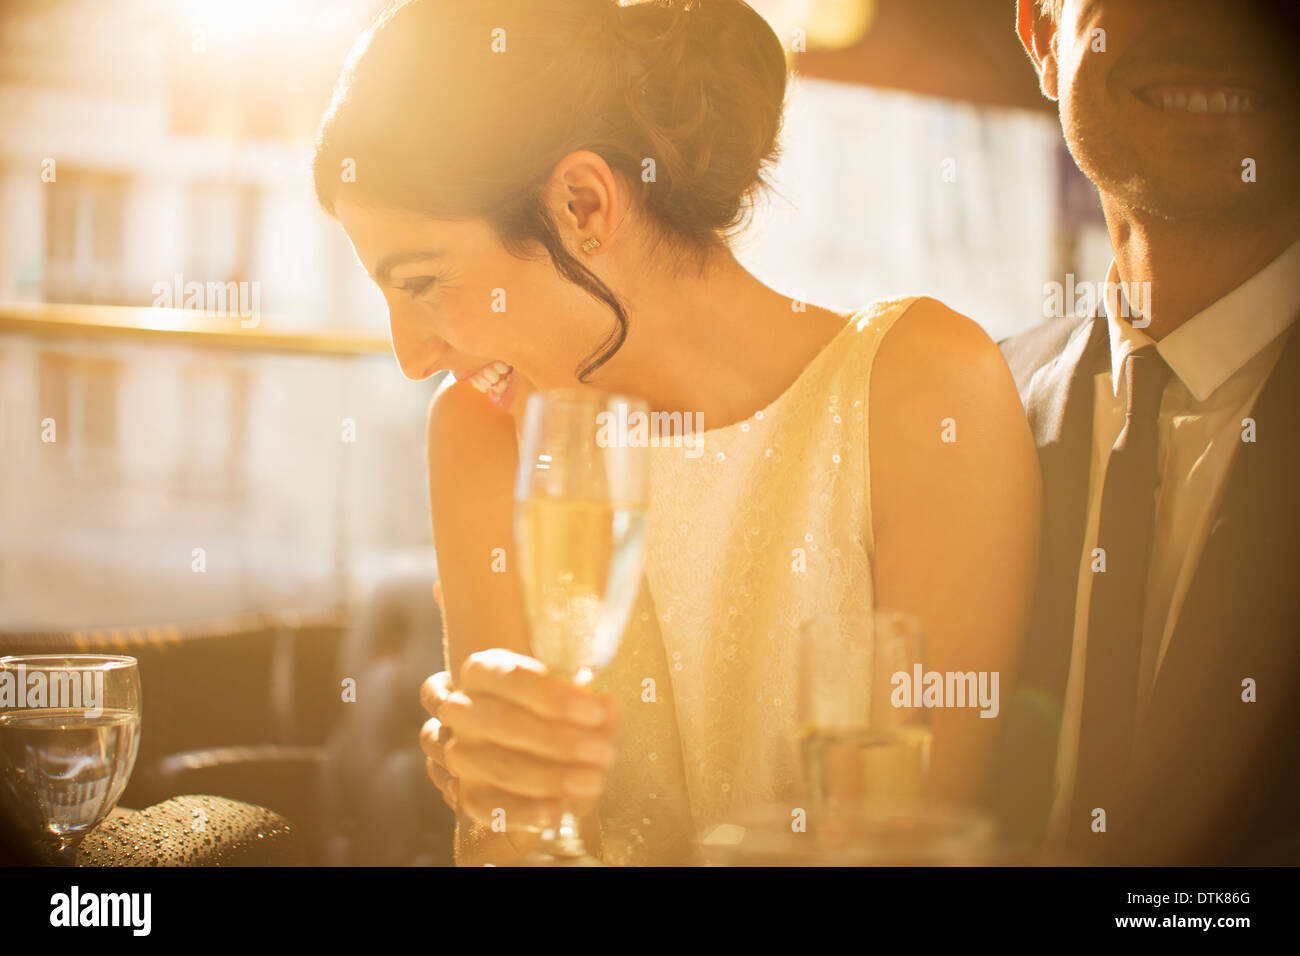 Couple having champagne together Stock Photo